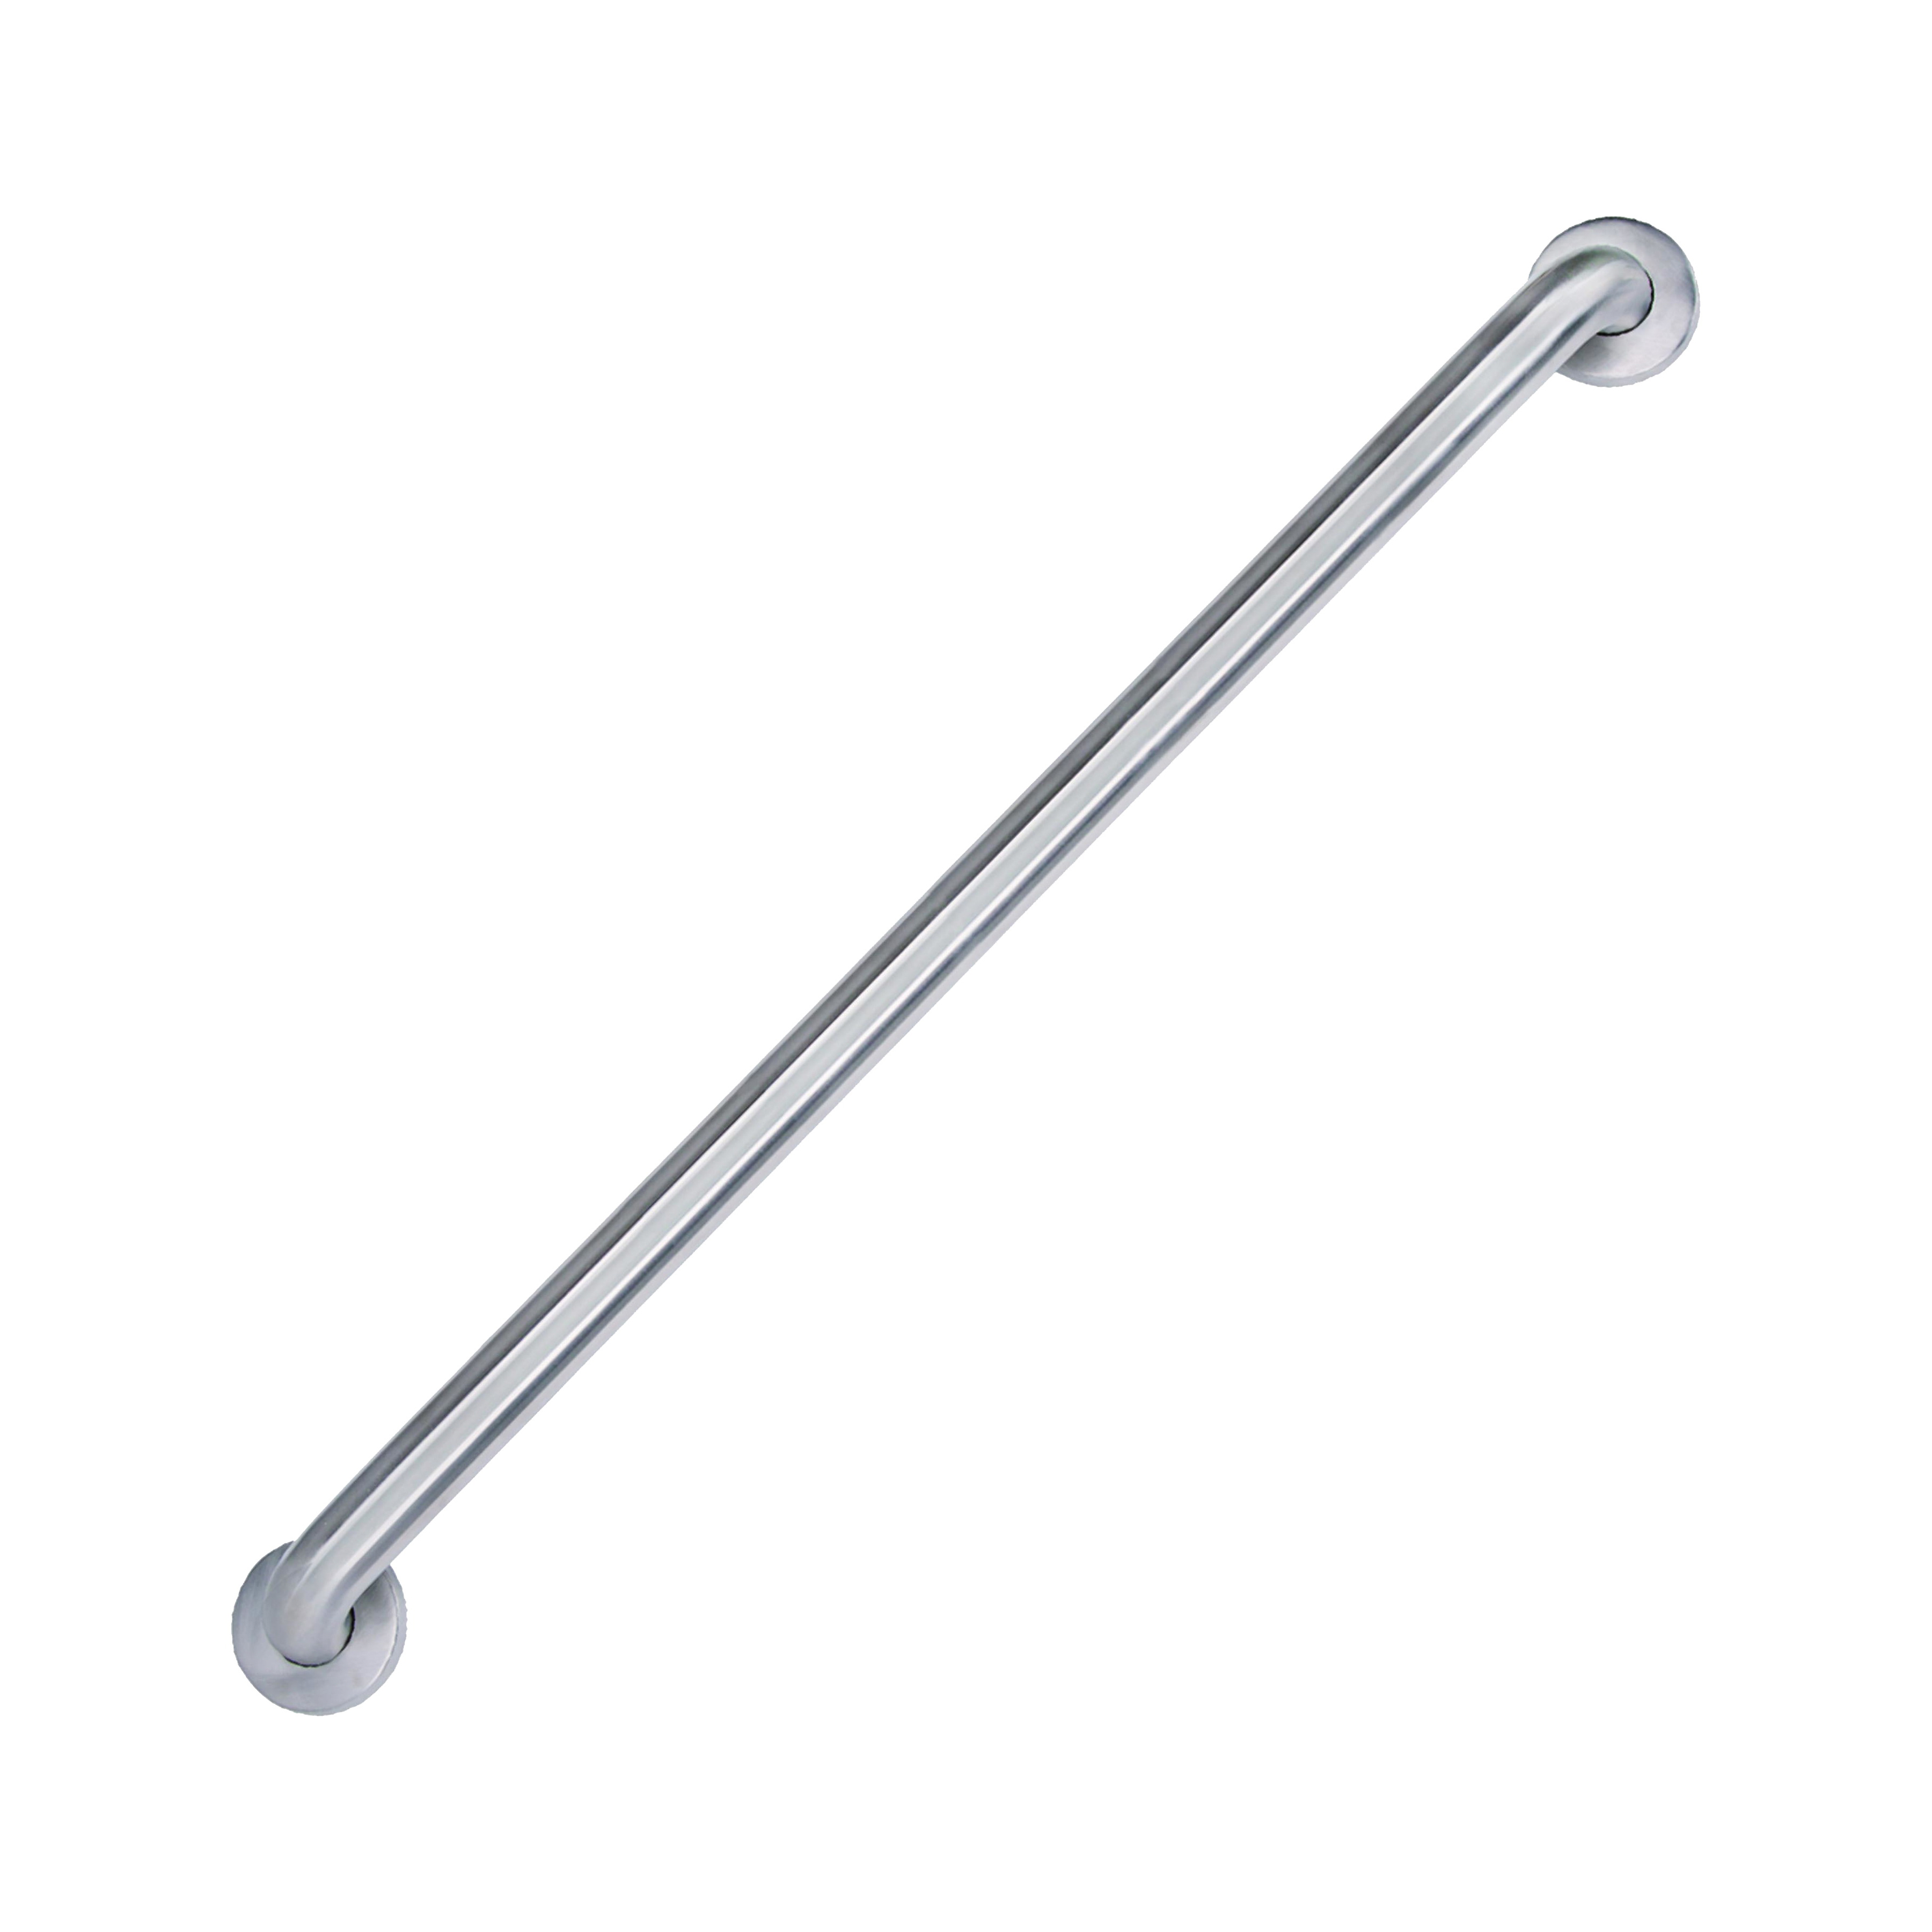 SG01-01&0136 Grab Bar, 36 in L Bar, Stainless Steel, Wall Mounted Mounting